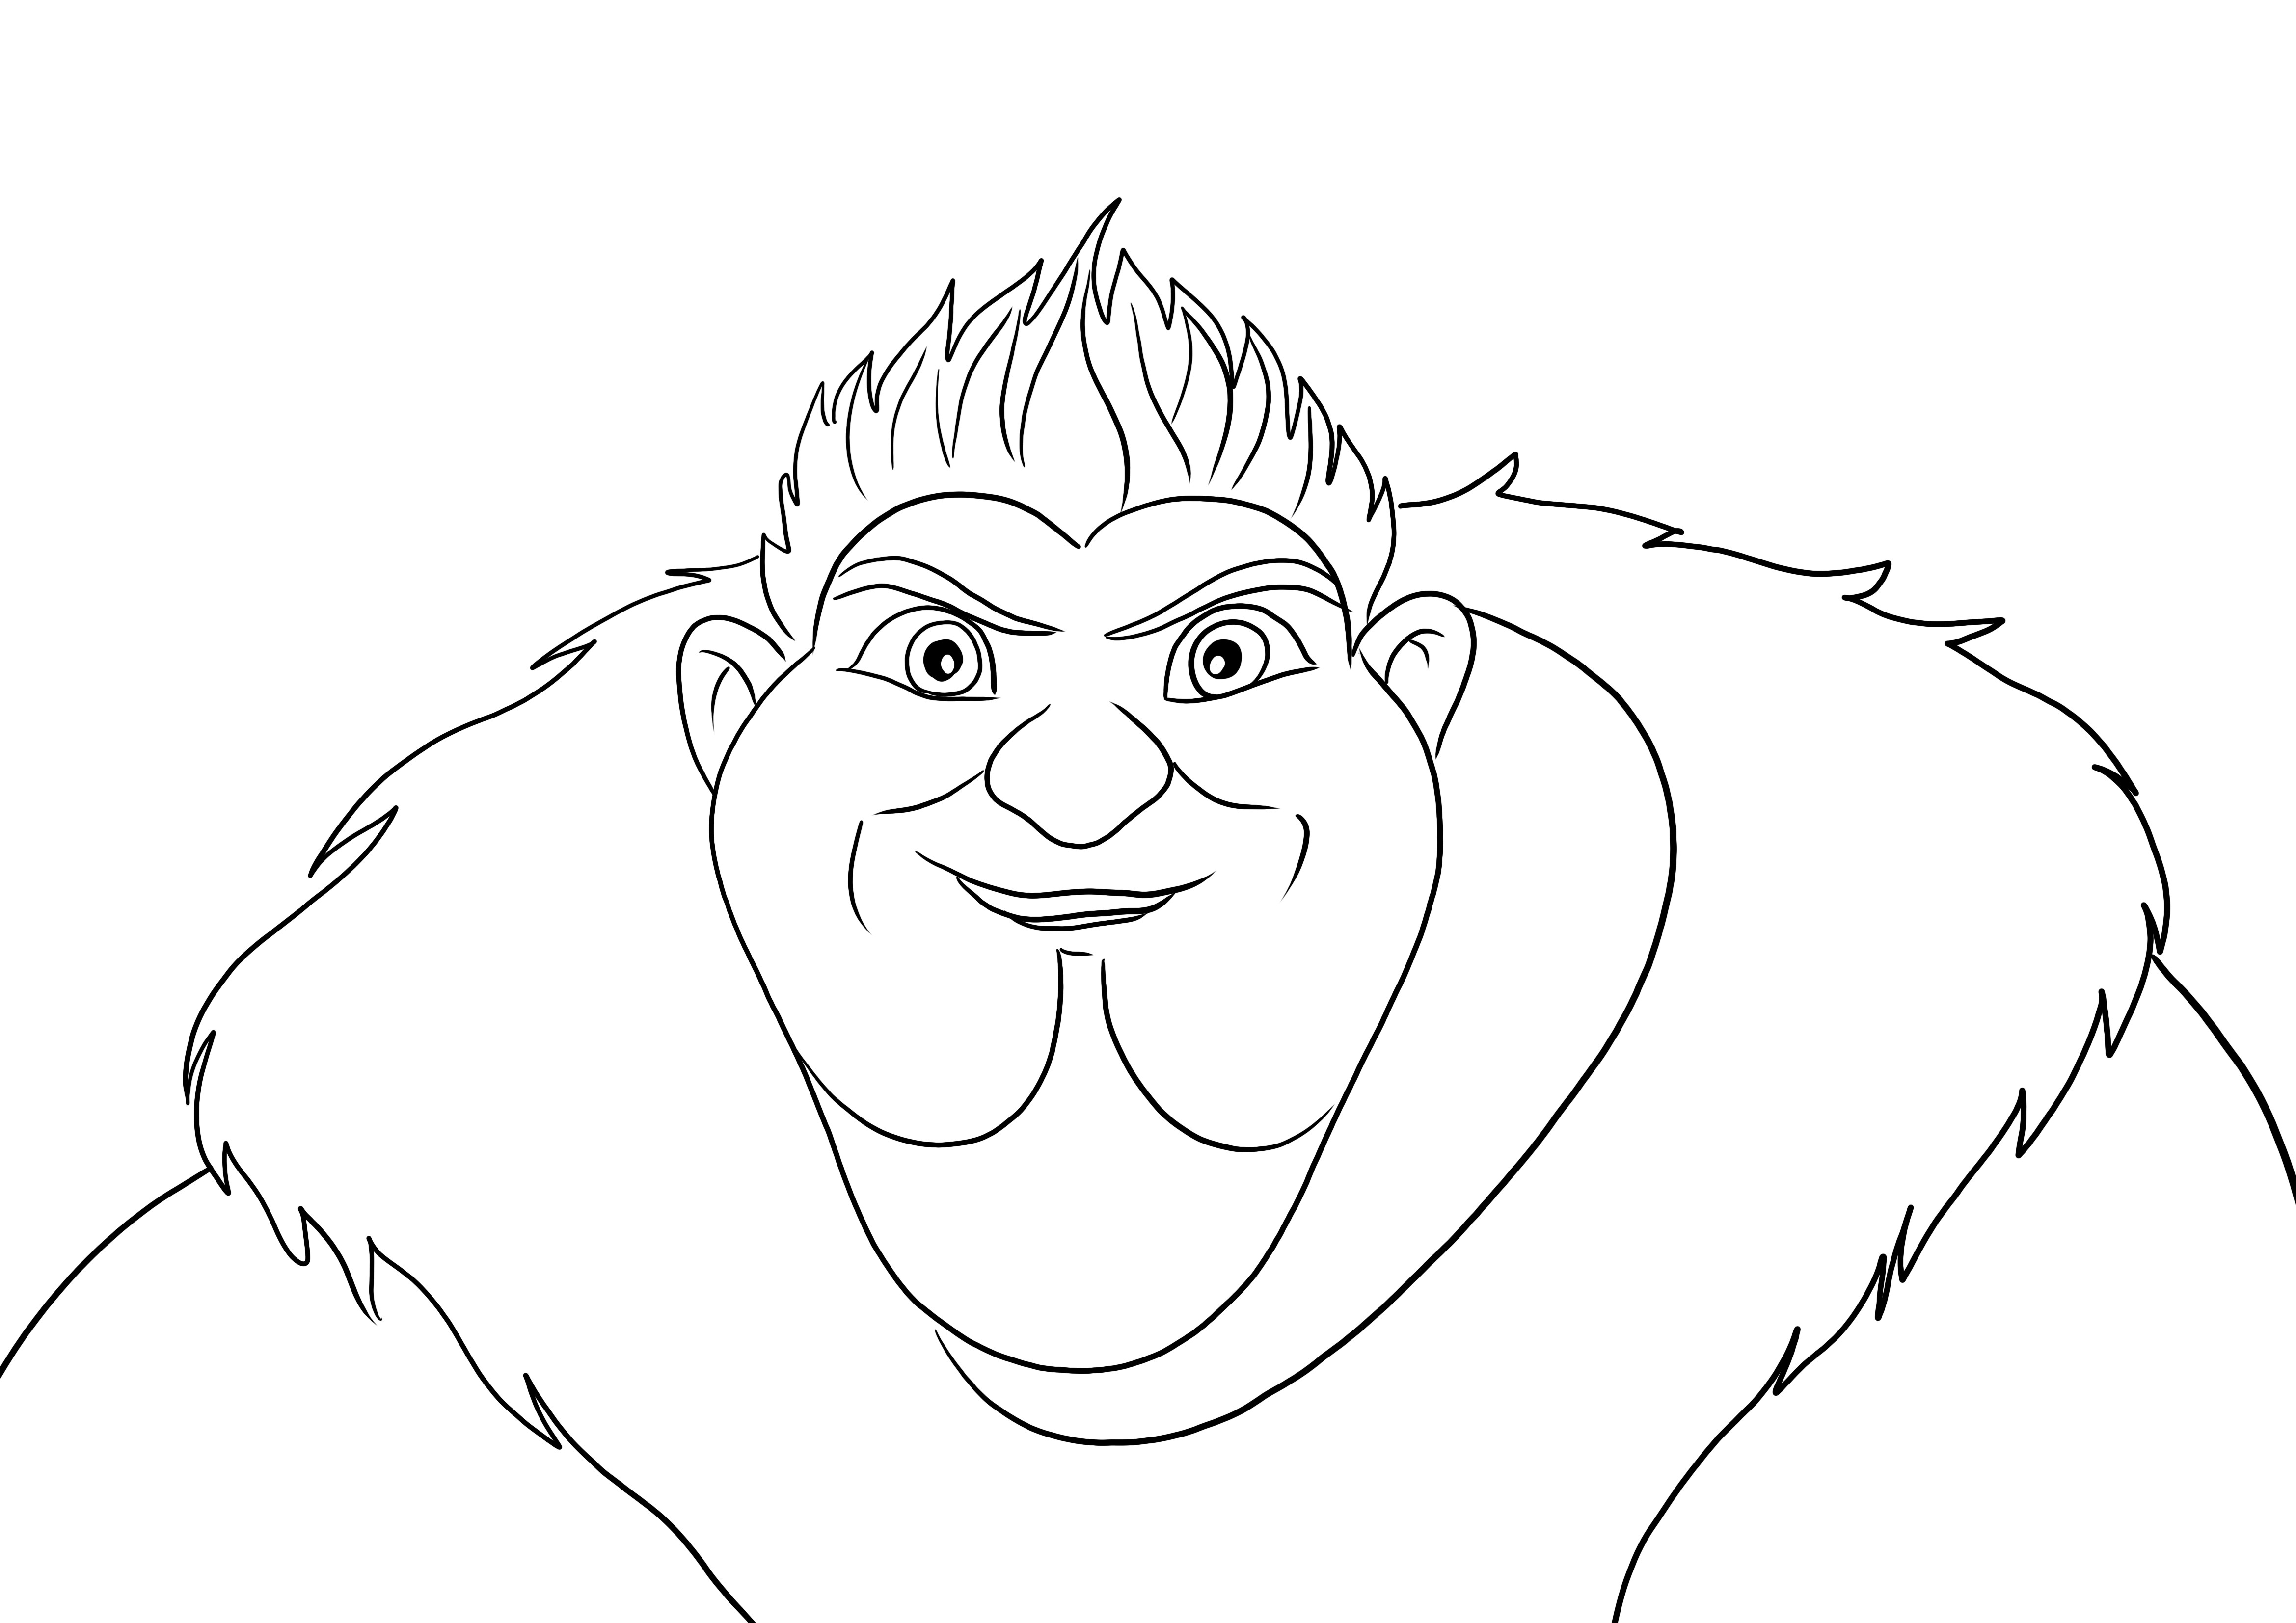 Funny picture of Grug from the Croods family-free to color and print